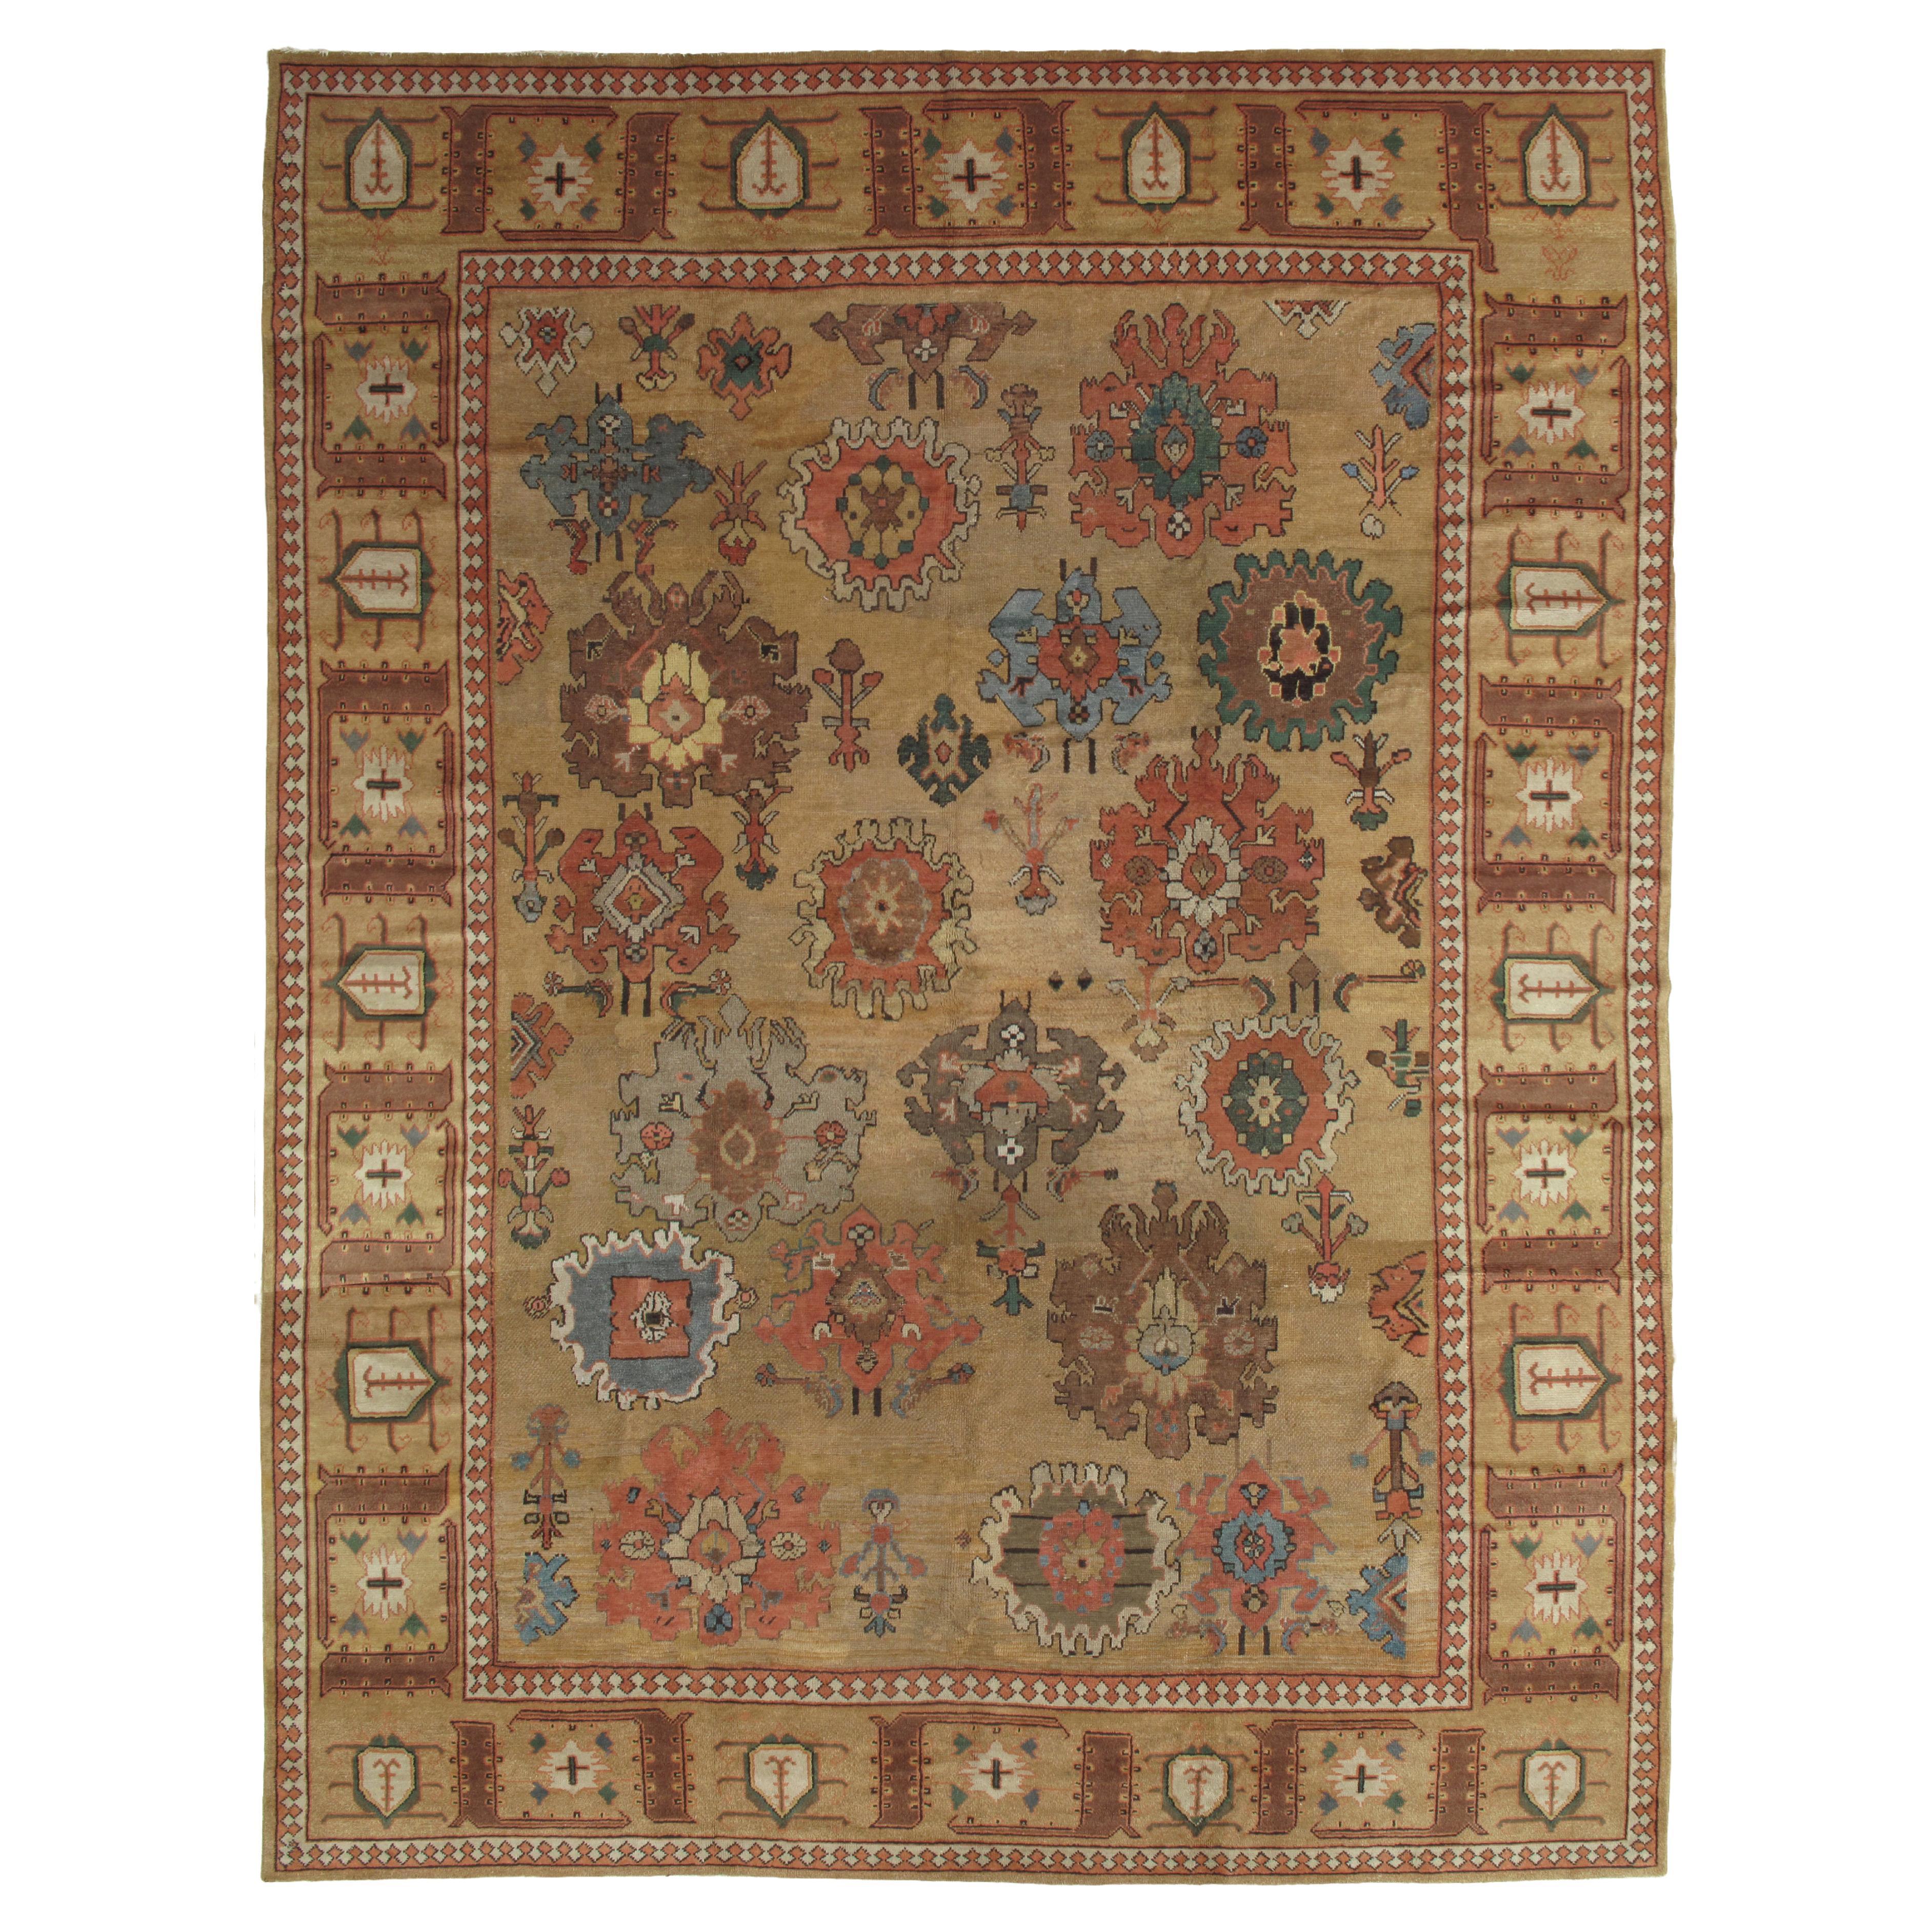 Antique Bakshaish Carpet, Oriental Persian Handmade in Tan Brown, Blue and Red For Sale